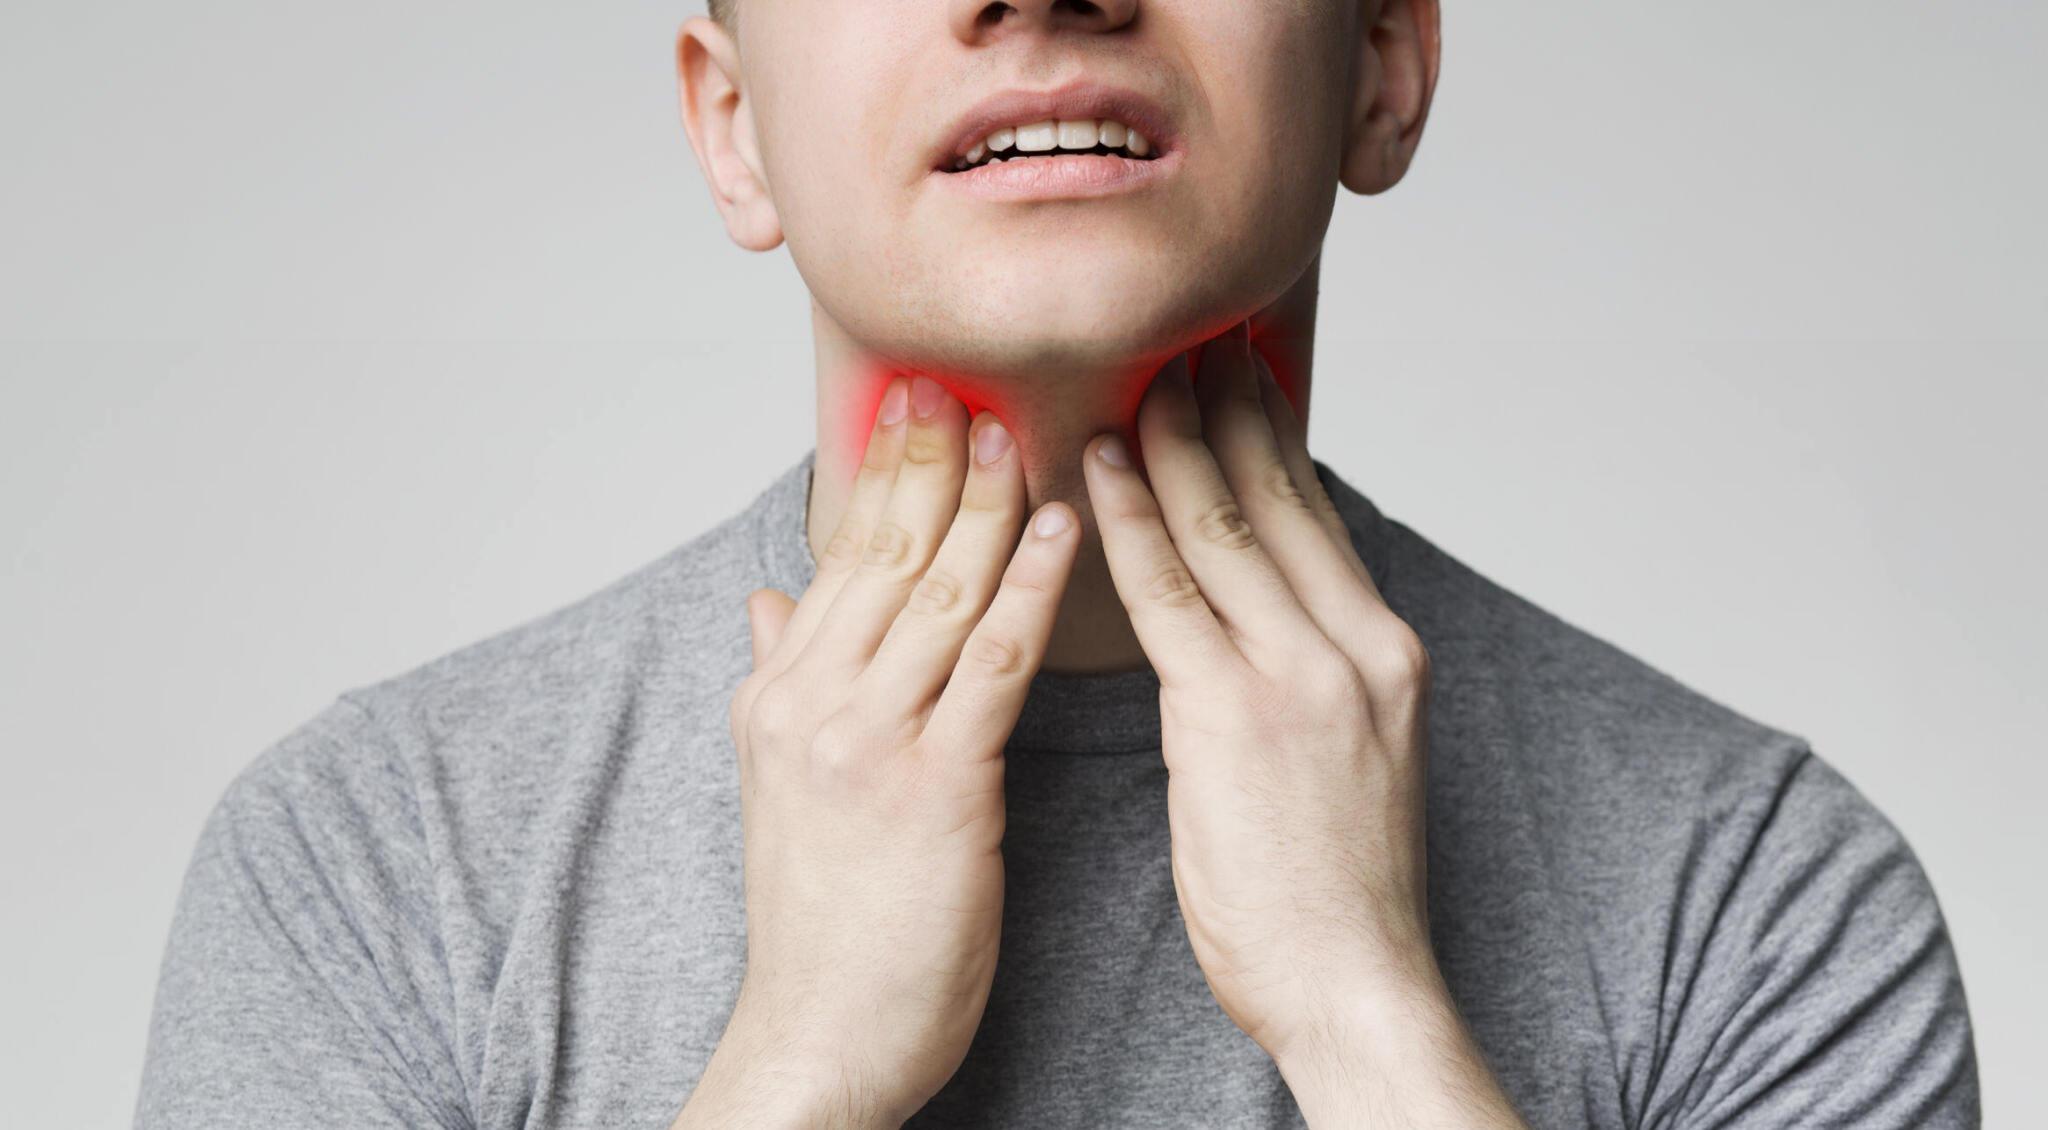 Sore Throat: Causes, Symptoms, and When to Seek Urgent Care in West Hartford, CT